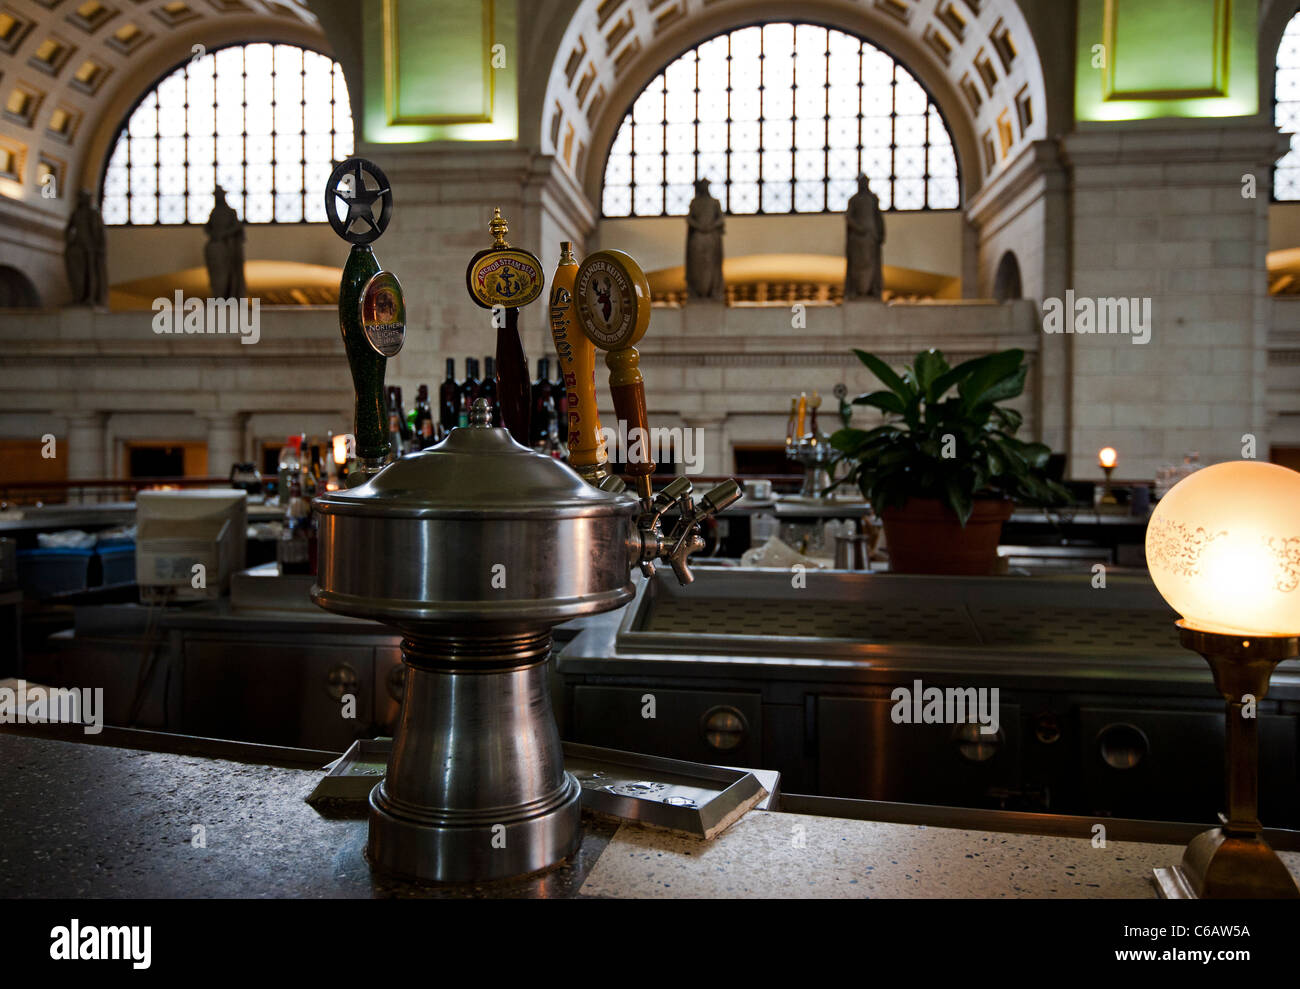 Union Station, Washington DC, A view of the bar / pub with no people Stock Photo